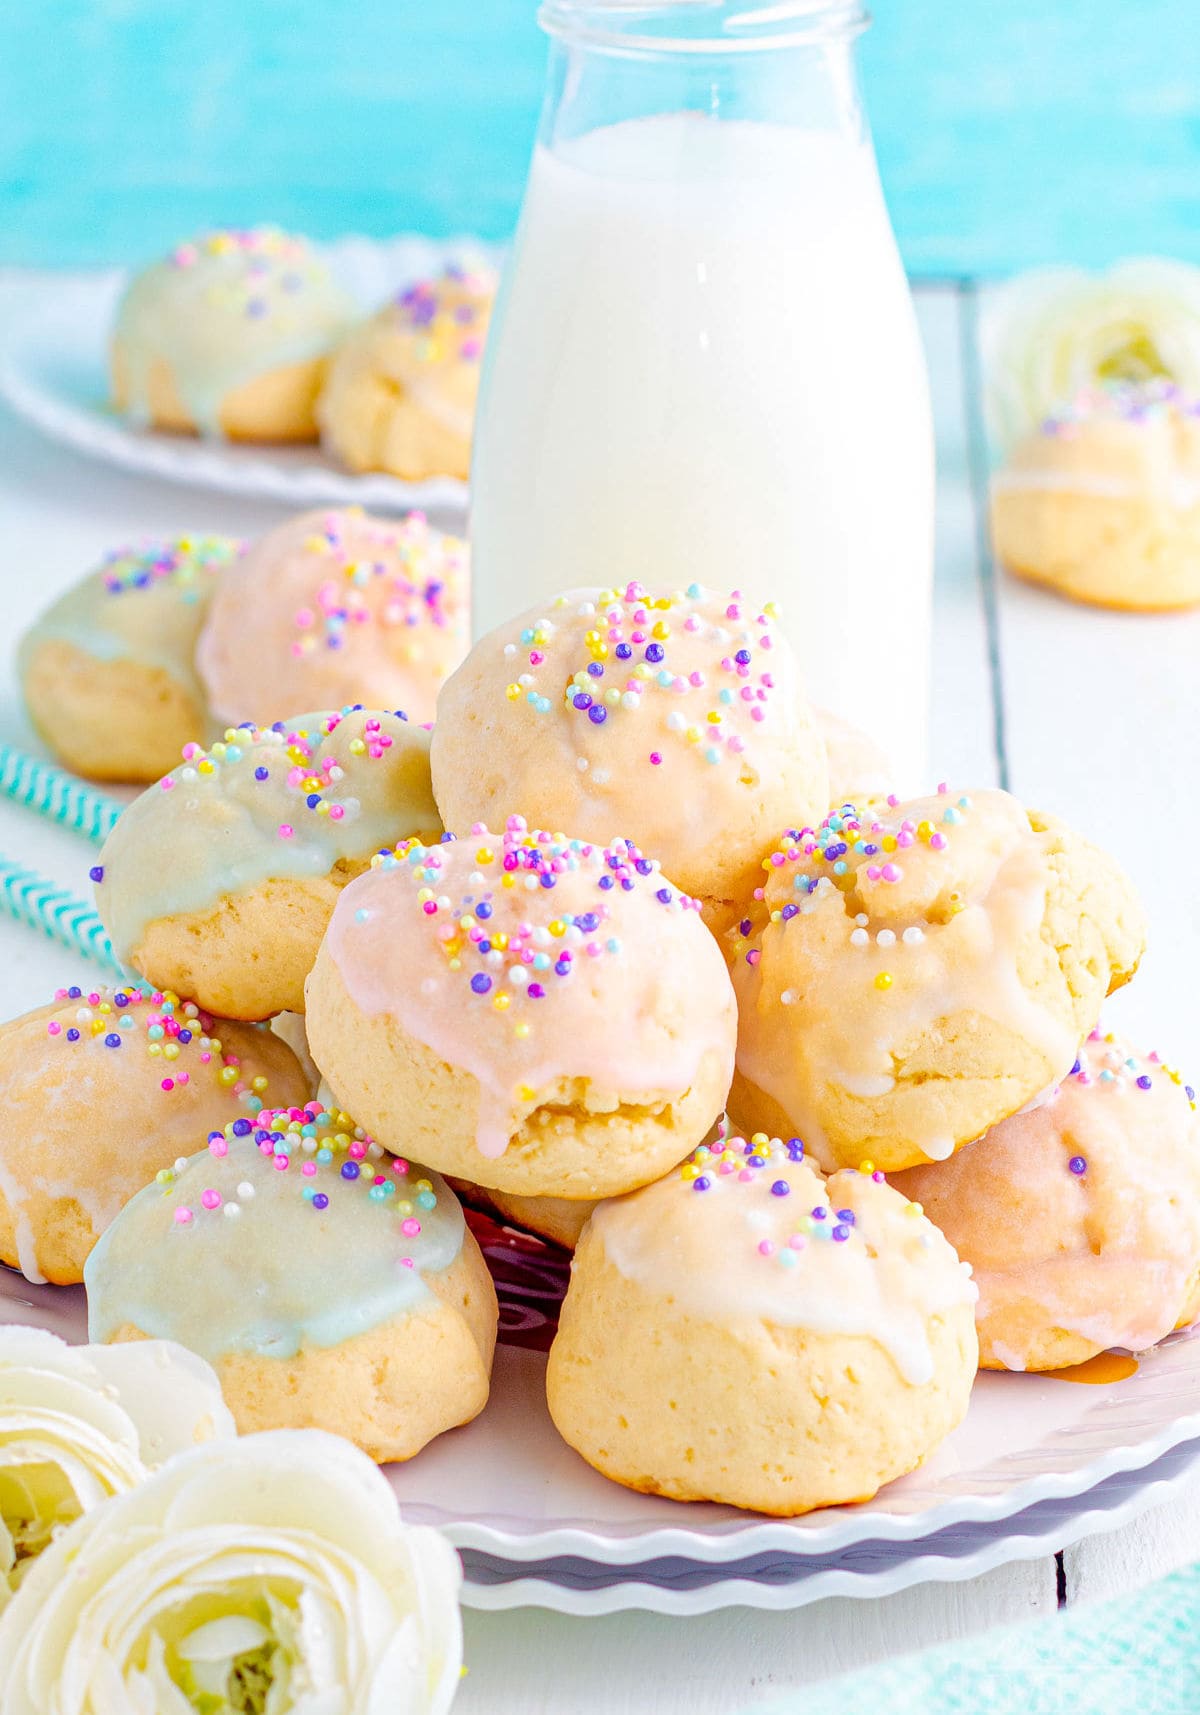 plate of Italian Cookies sitting on front of a jug of milk and decorated with a pastel glaze and topped with sprinkles. Aqua background and more cookies can be seen in the background.